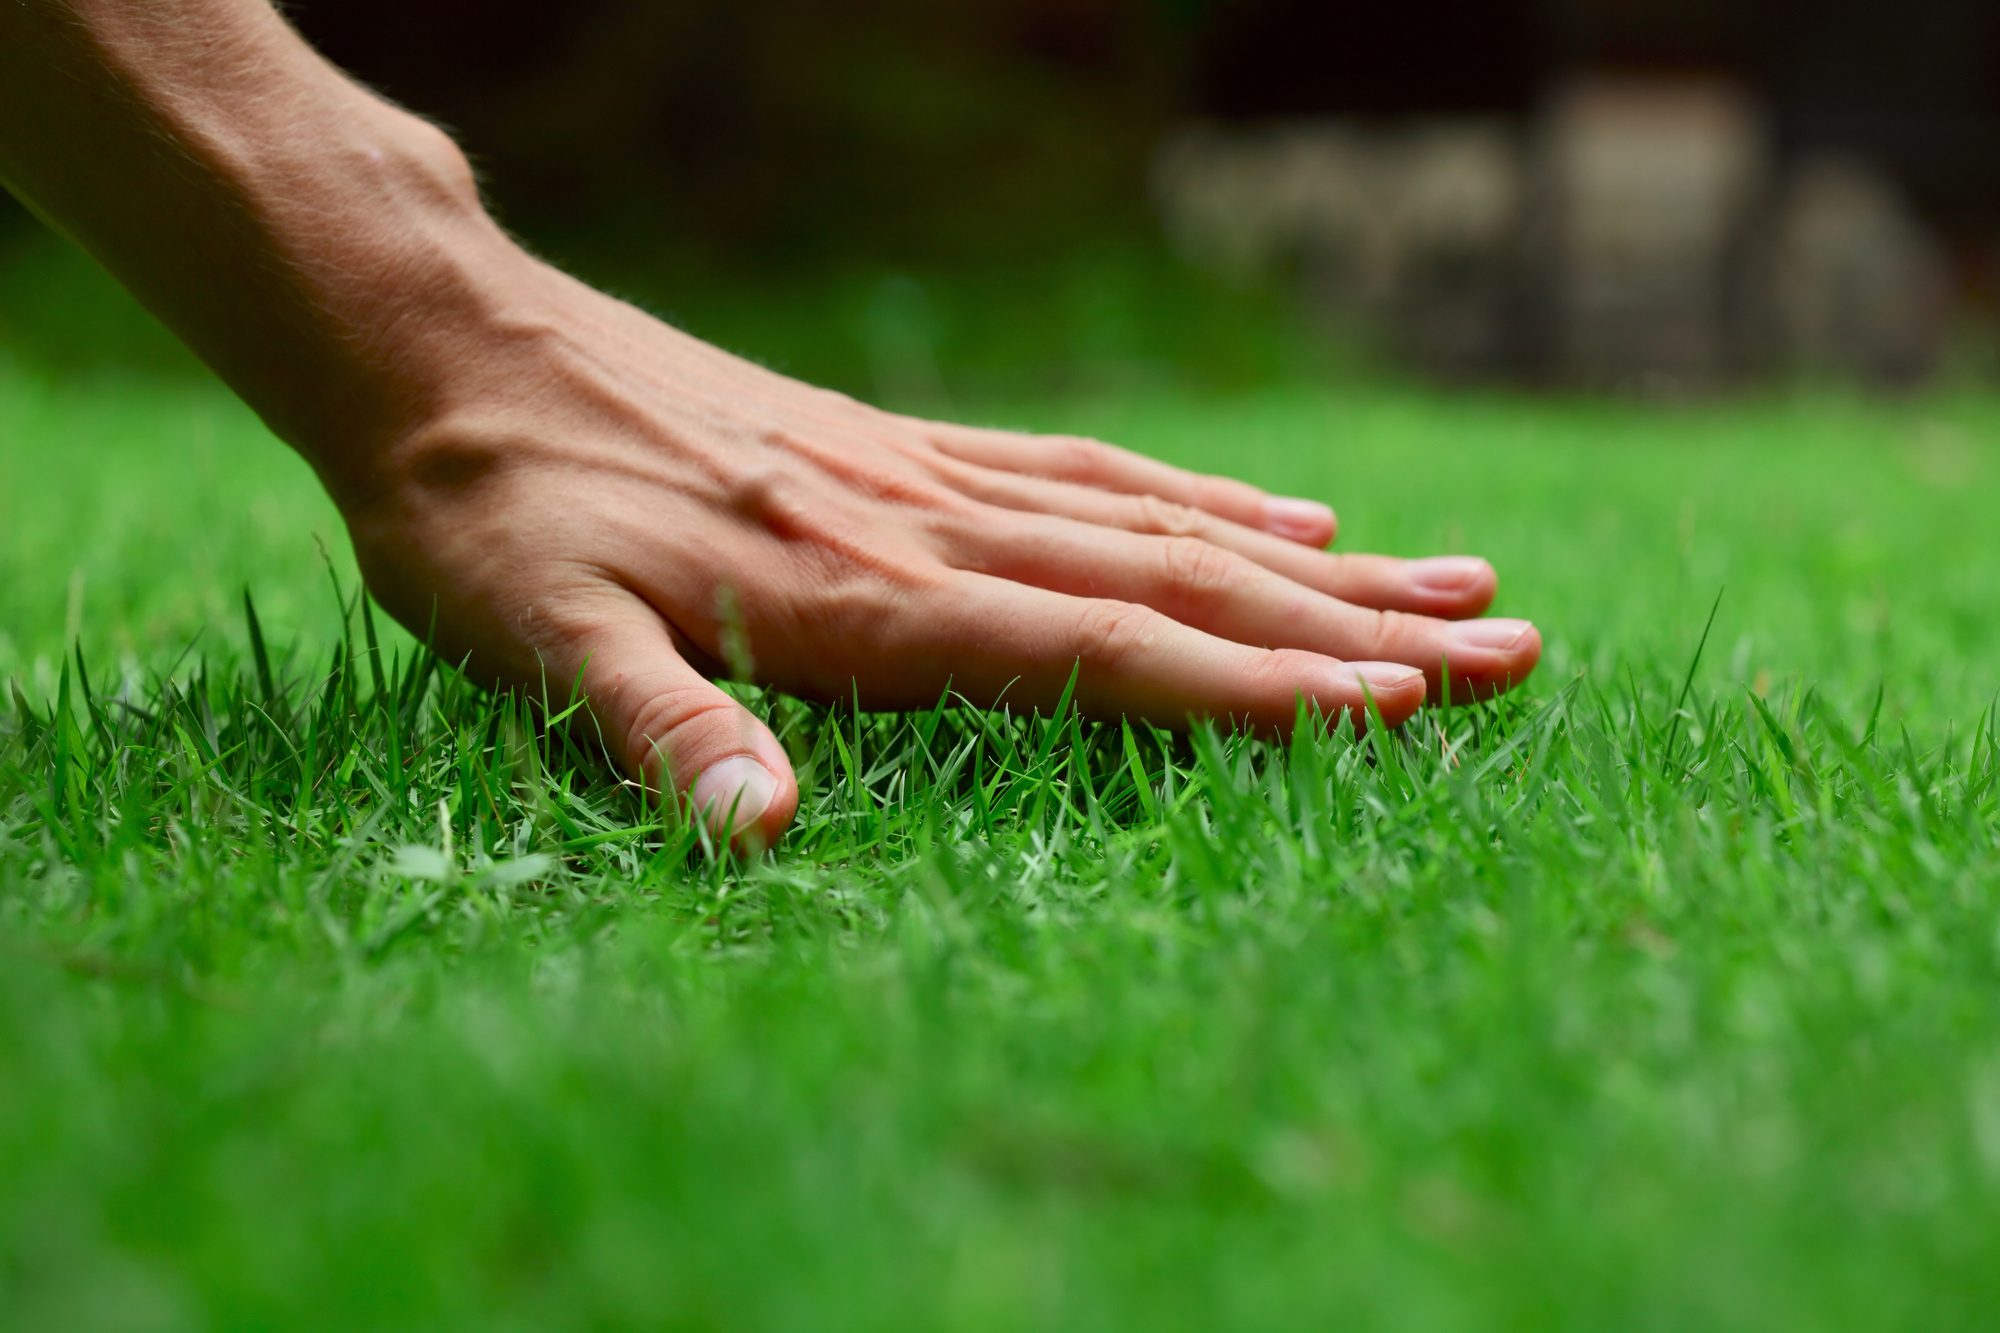 Lawn Maintenance vs Turfgrass Management. Which Do I Need?